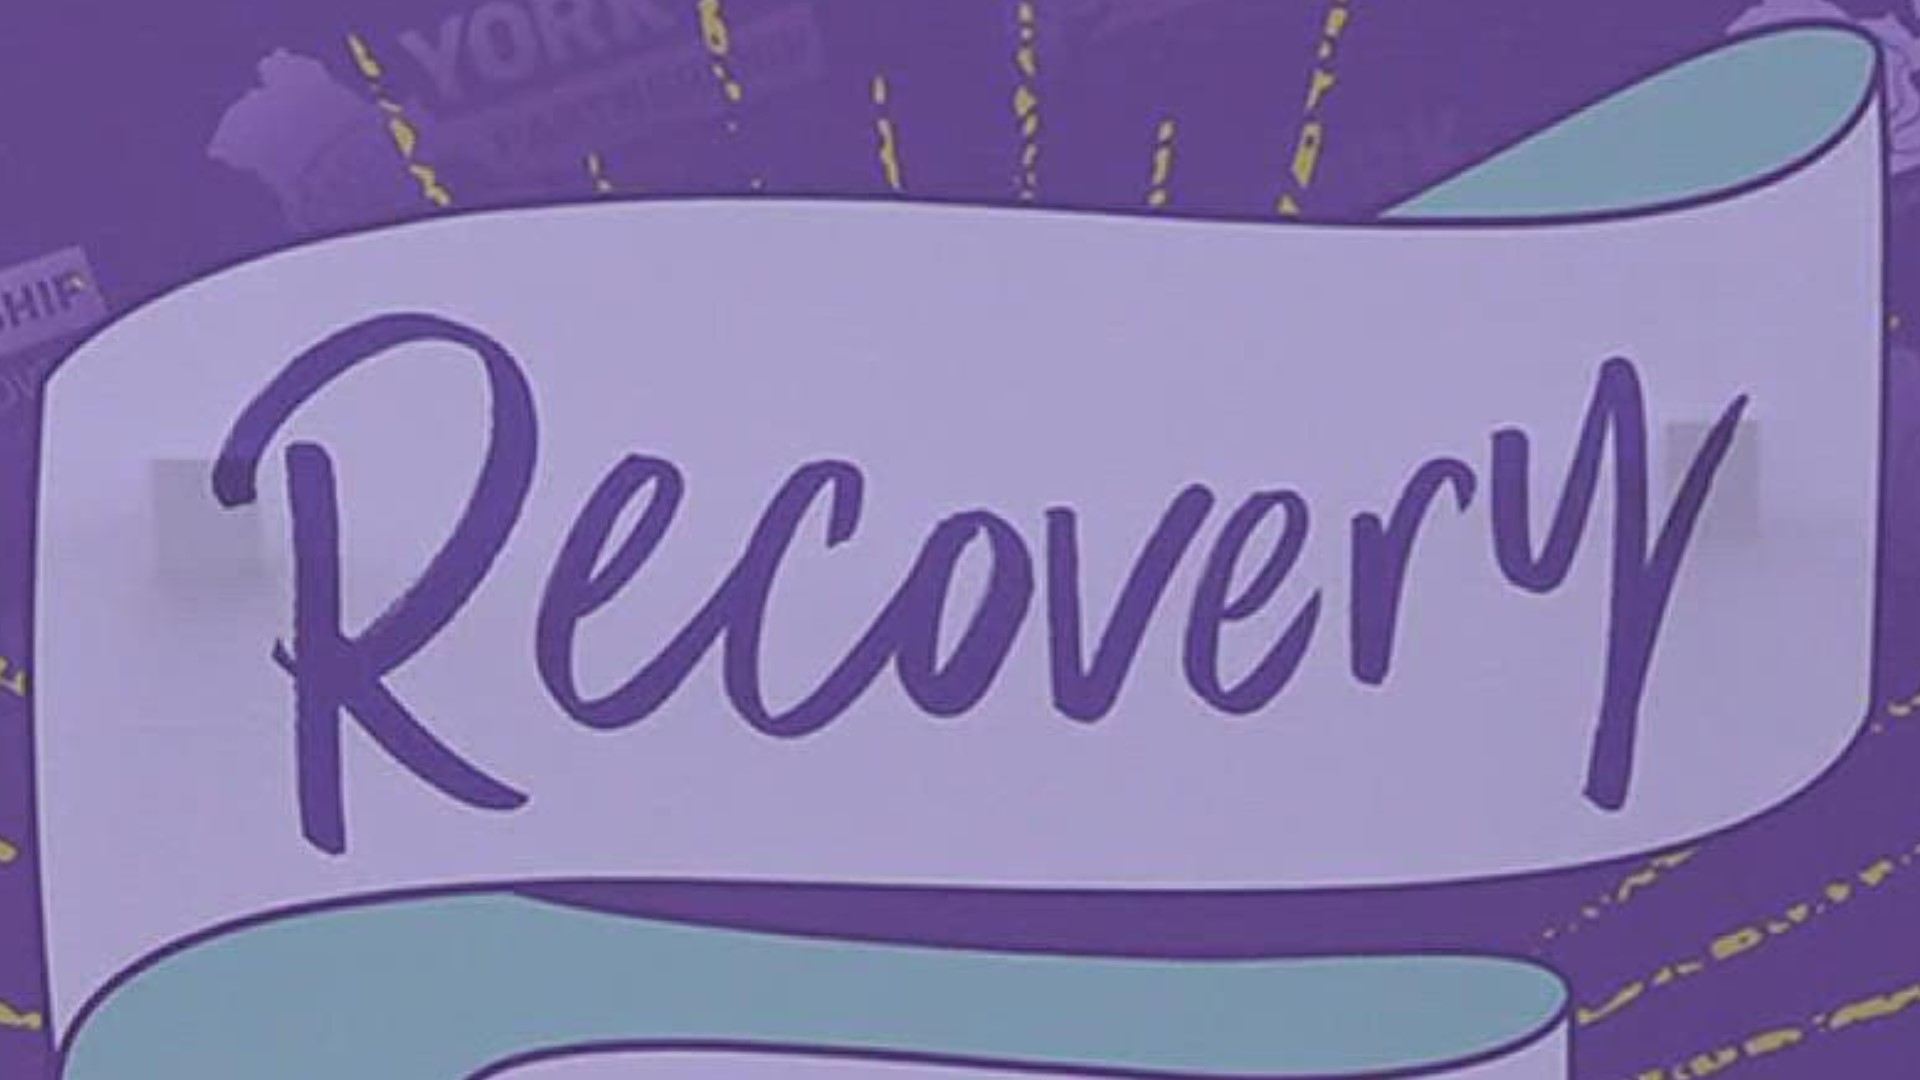 The theme this year is "Recovery is for Everyone," to help spread awareness and remove the stigma of being someone going through the healing process.